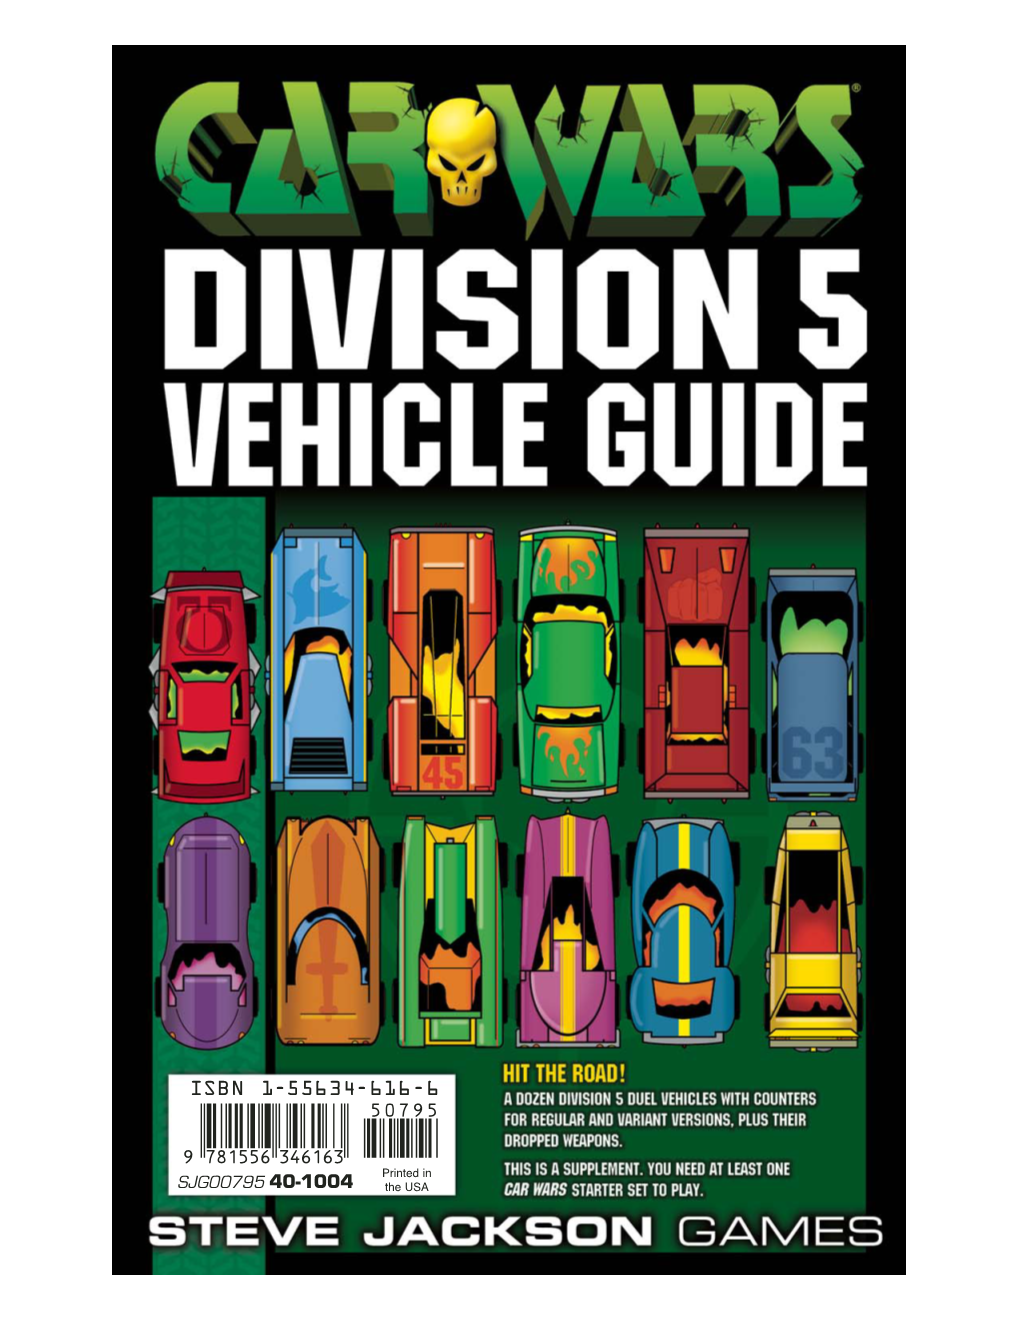 Car Wars Division 5 Vehicle Guide Is Copyright © 2002 by Steve Jackson Games Incorporated